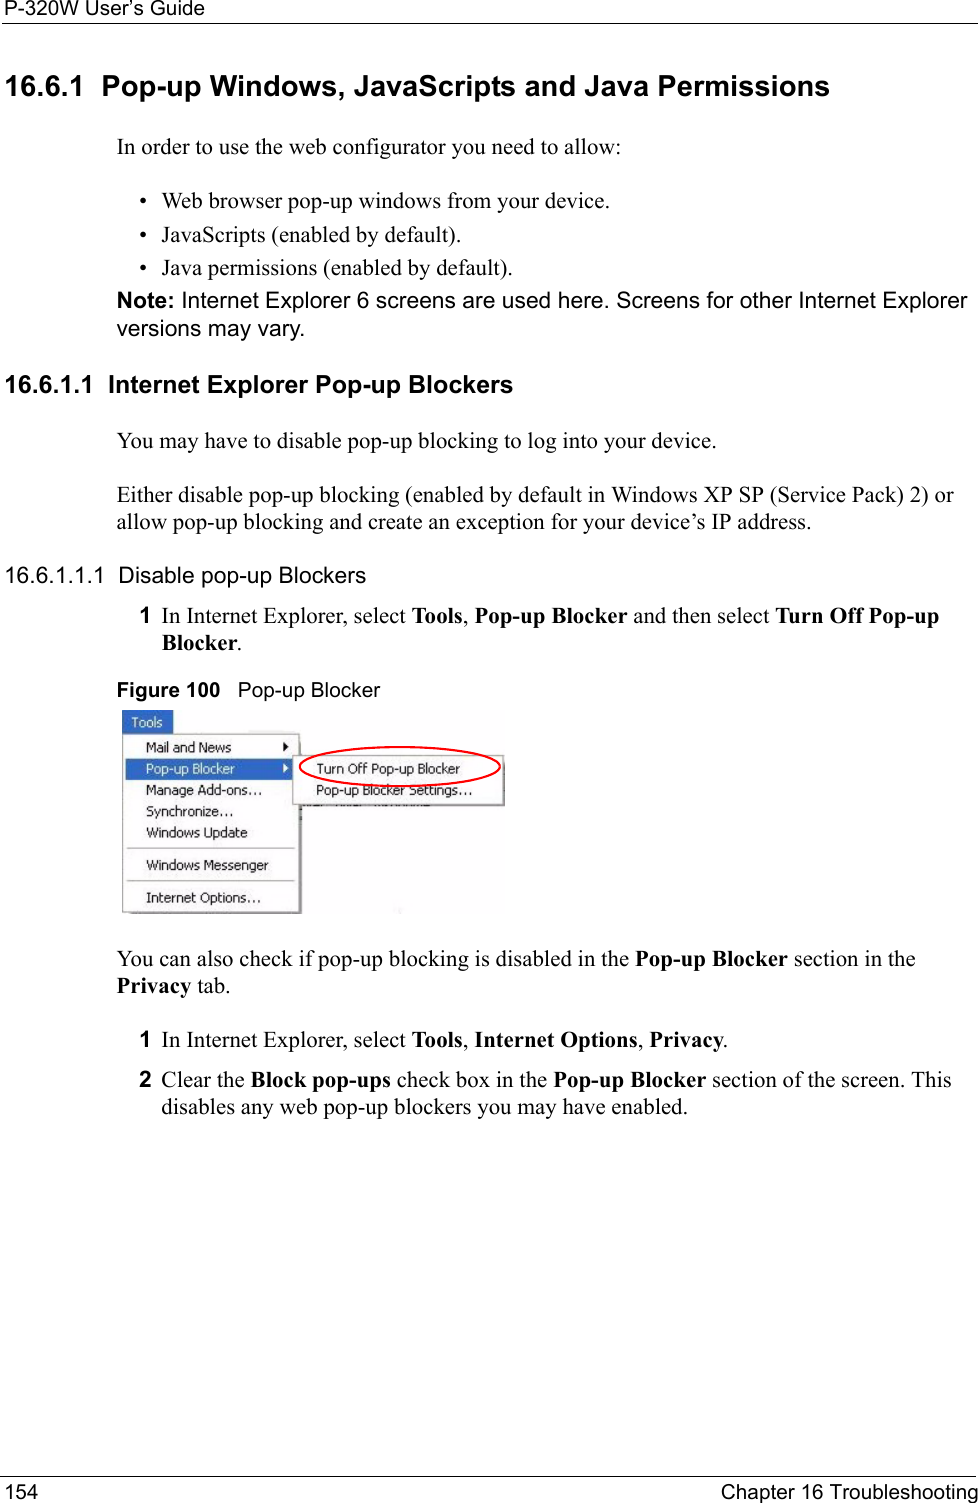 P-320W User’s Guide154  Chapter 16 Troubleshooting16.6.1  Pop-up Windows, JavaScripts and Java Permissions In order to use the web configurator you need to allow:• Web browser pop-up windows from your device.• JavaScripts (enabled by default).• Java permissions (enabled by default).Note: Internet Explorer 6 screens are used here. Screens for other Internet Explorer versions may vary.16.6.1.1  Internet Explorer Pop-up BlockersYou may have to disable pop-up blocking to log into your device. Either disable pop-up blocking (enabled by default in Windows XP SP (Service Pack) 2) or allow pop-up blocking and create an exception for your device’s IP address.16.6.1.1.1  Disable pop-up Blockers1In Internet Explorer, select Tools, Pop-up Blocker and then select Turn Off Pop-up Blocker. Figure 100   Pop-up BlockerYou can also check if pop-up blocking is disabled in the Pop-up Blocker section in the Privacy tab. 1In Internet Explorer, select Tools, Internet Options, Privacy.2Clear the Block pop-ups check box in the Pop-up Blocker section of the screen. This disables any web pop-up blockers you may have enabled. 